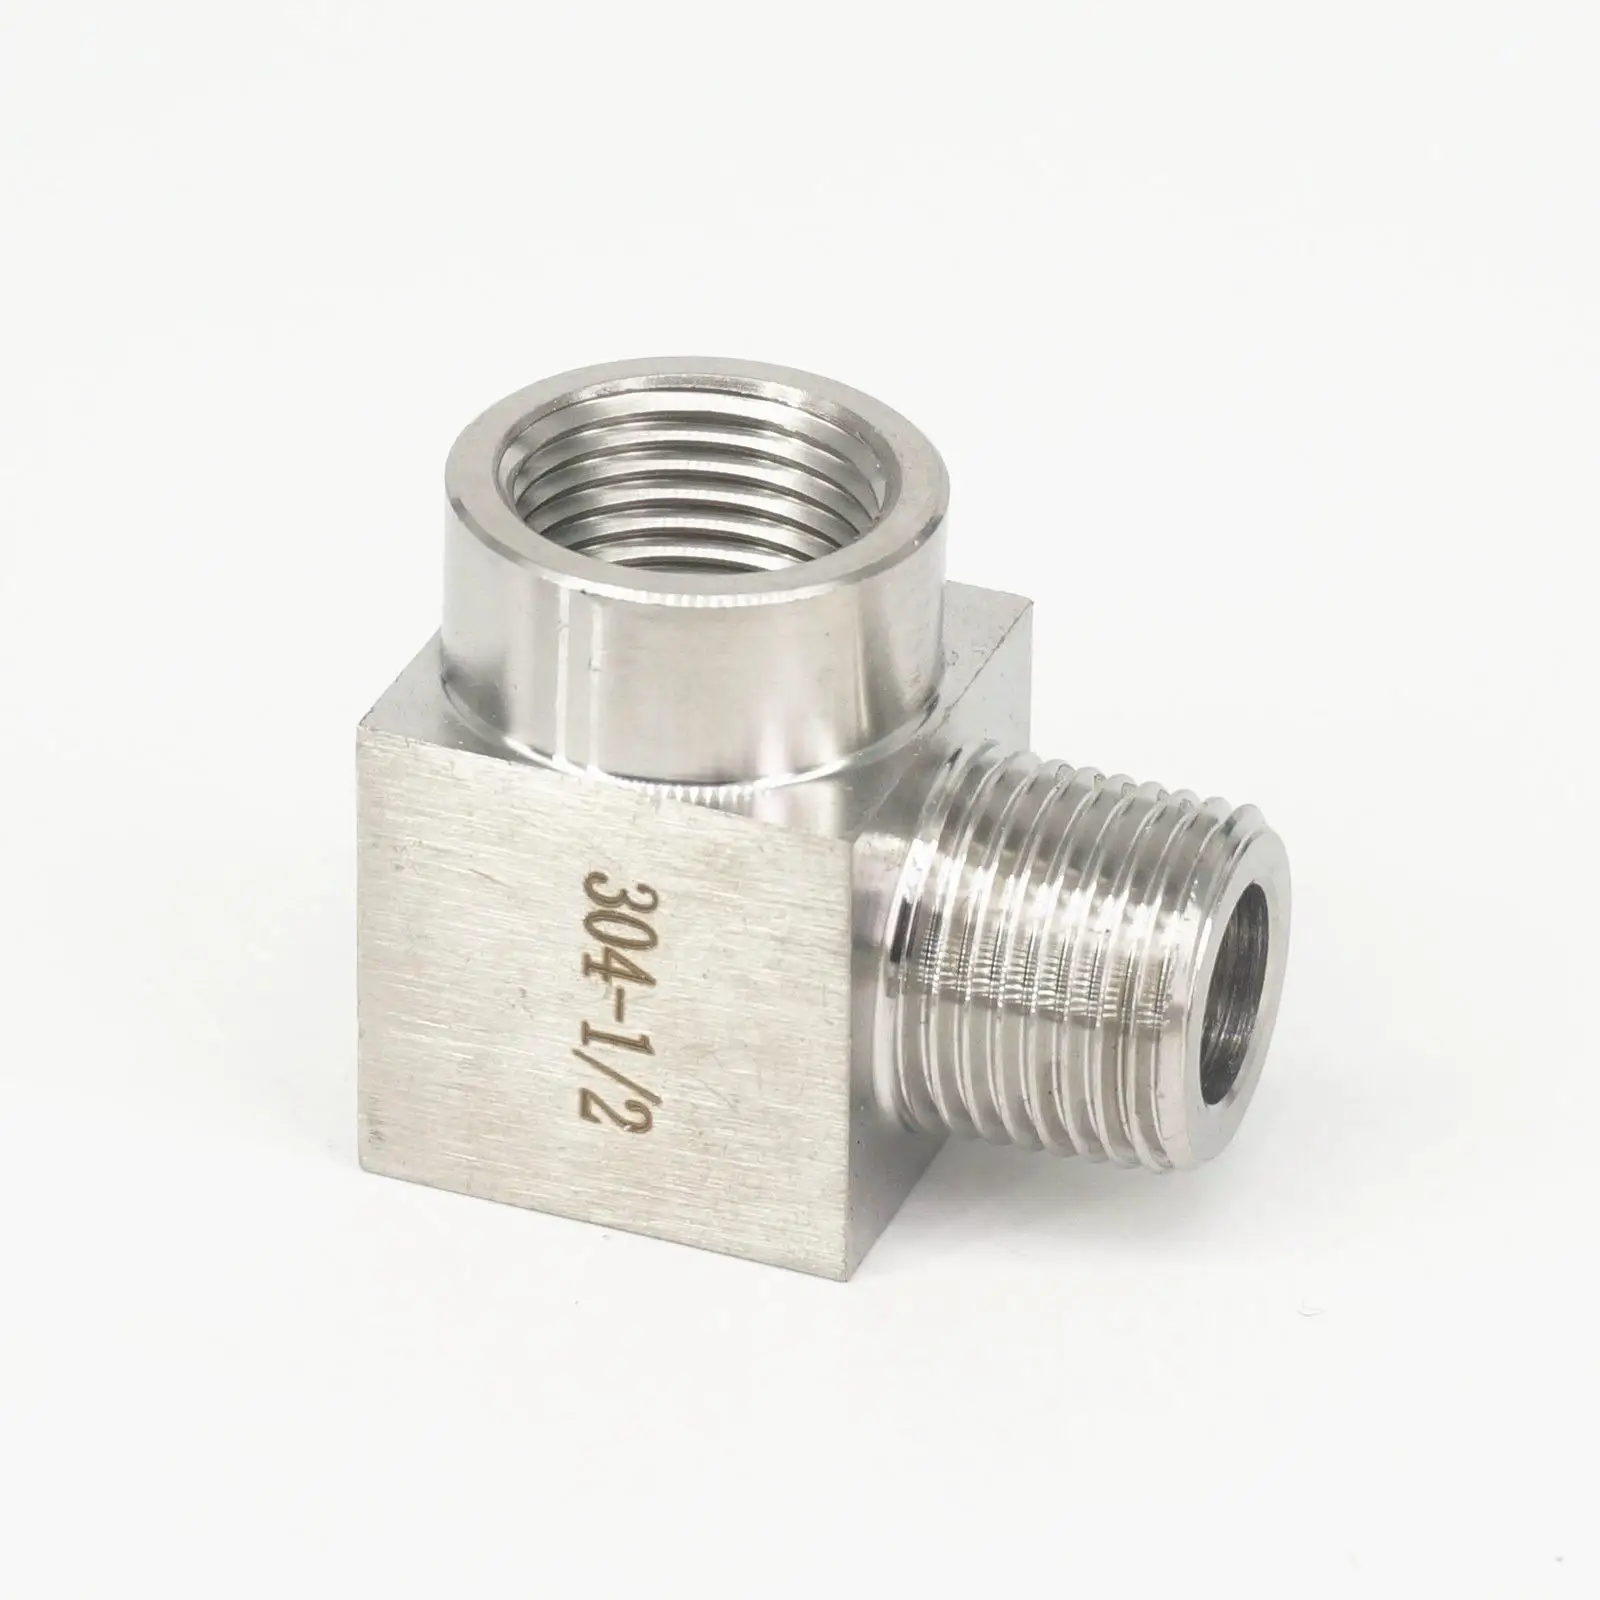 Stainless Steel 304 Male BSP Equal Elbow Hydraulic Pneumatic Pipe Fittings 